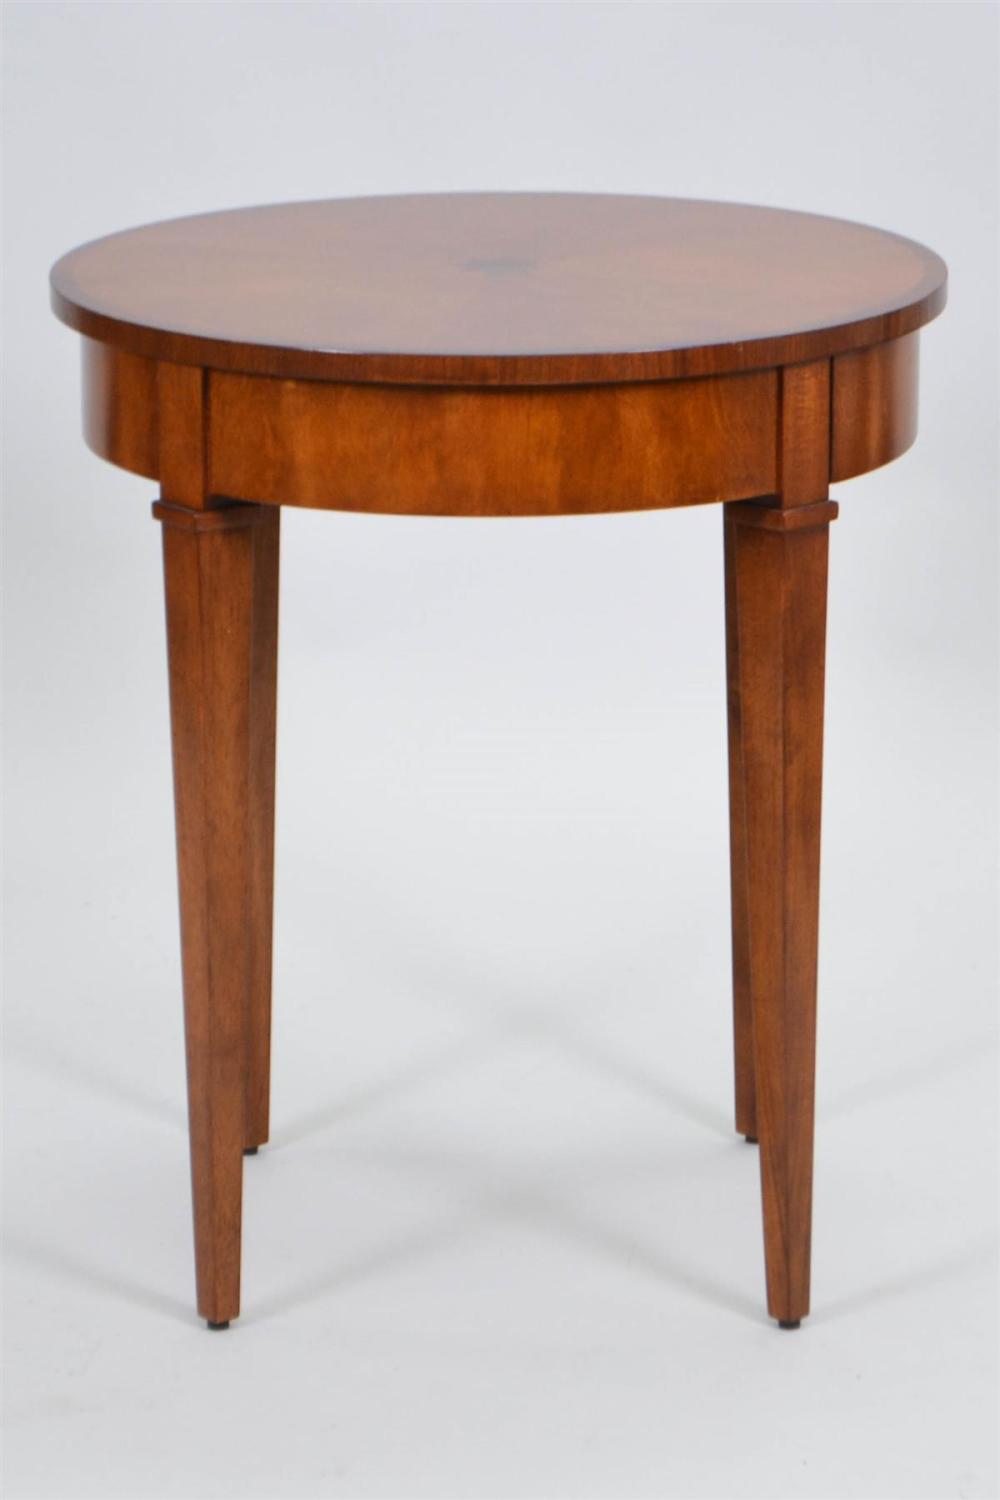 NEOCLASSICAL STYLE INLAID FRUITWOOD 33b695